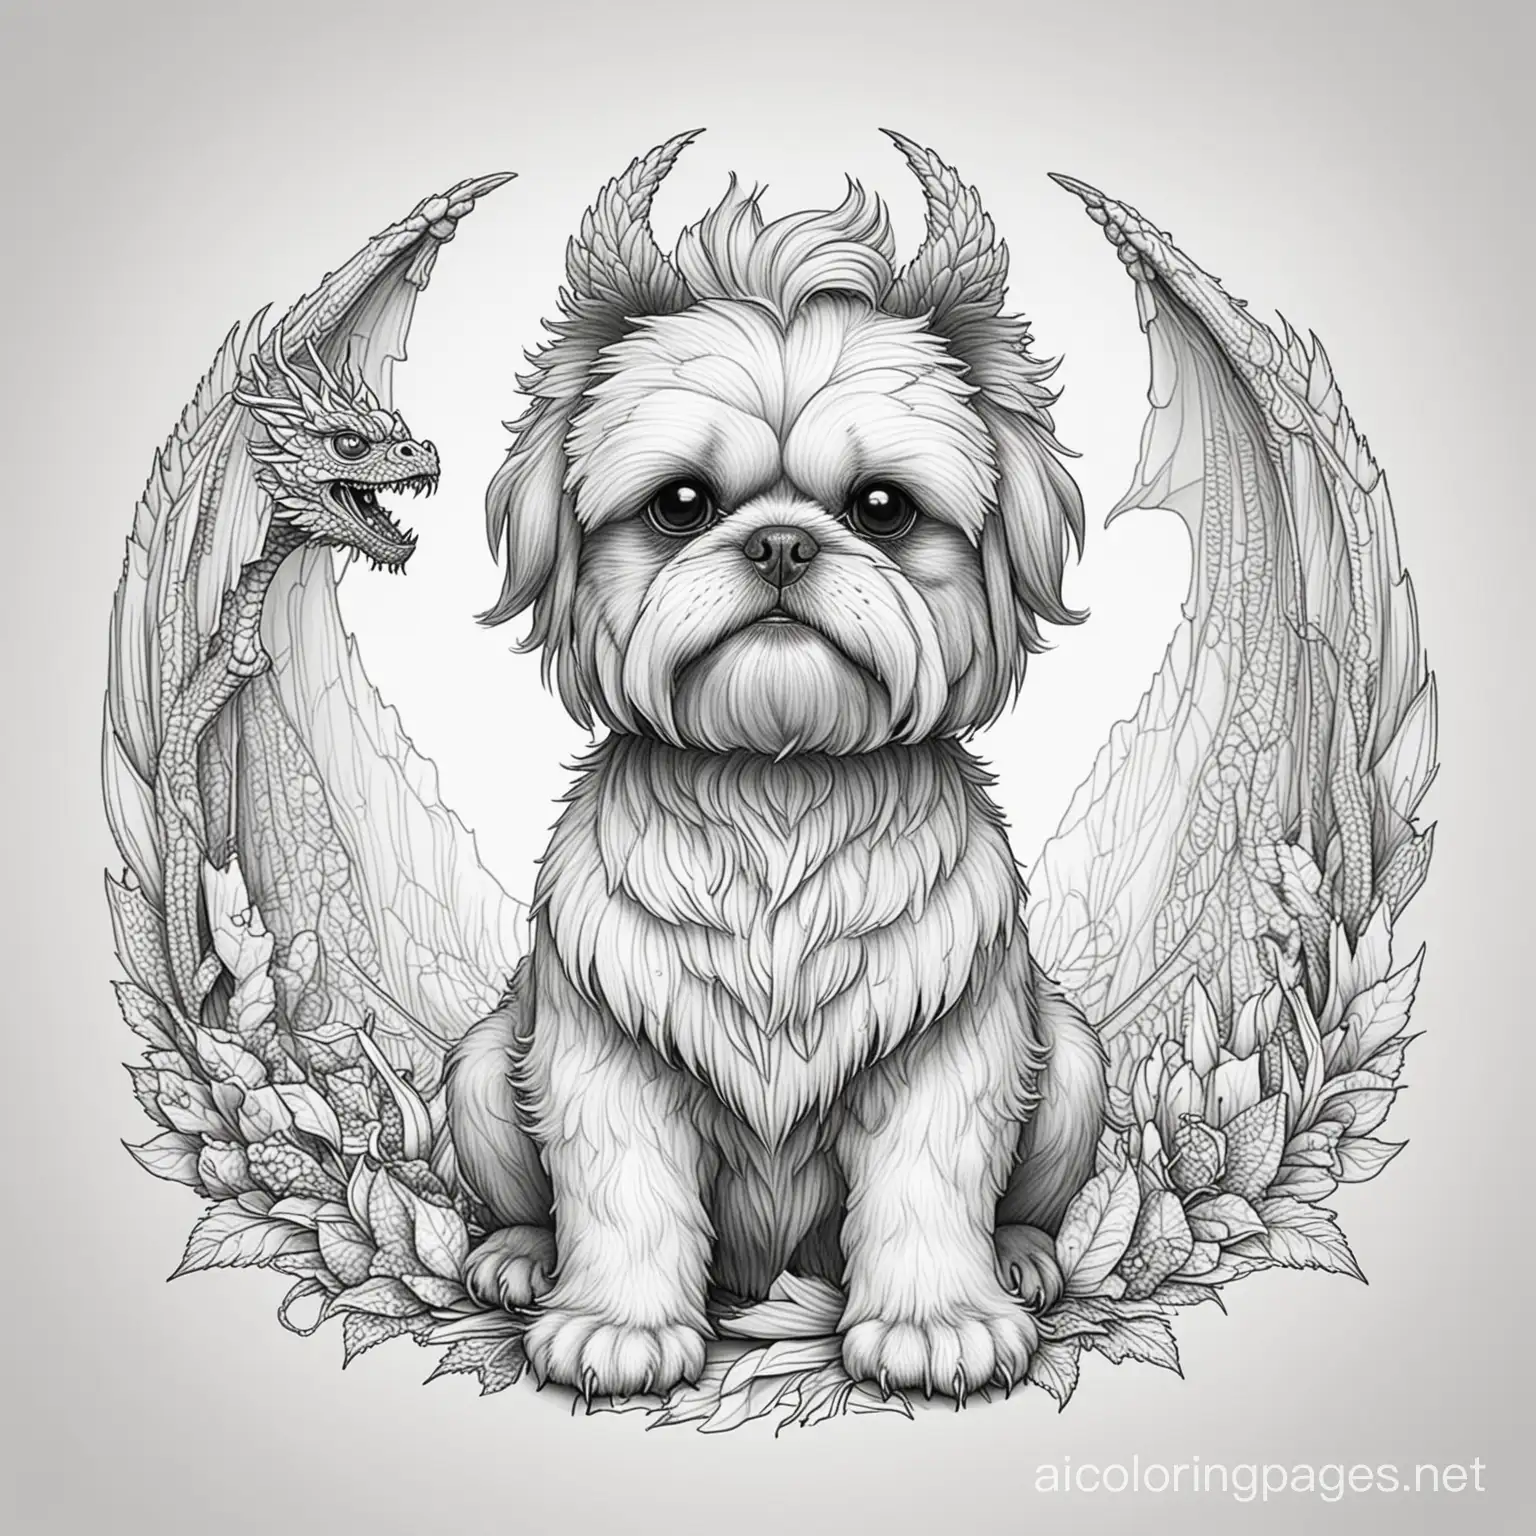 Dragon-Shih-Tzu-Coloring-Page-Simple-Line-Art-for-Kids